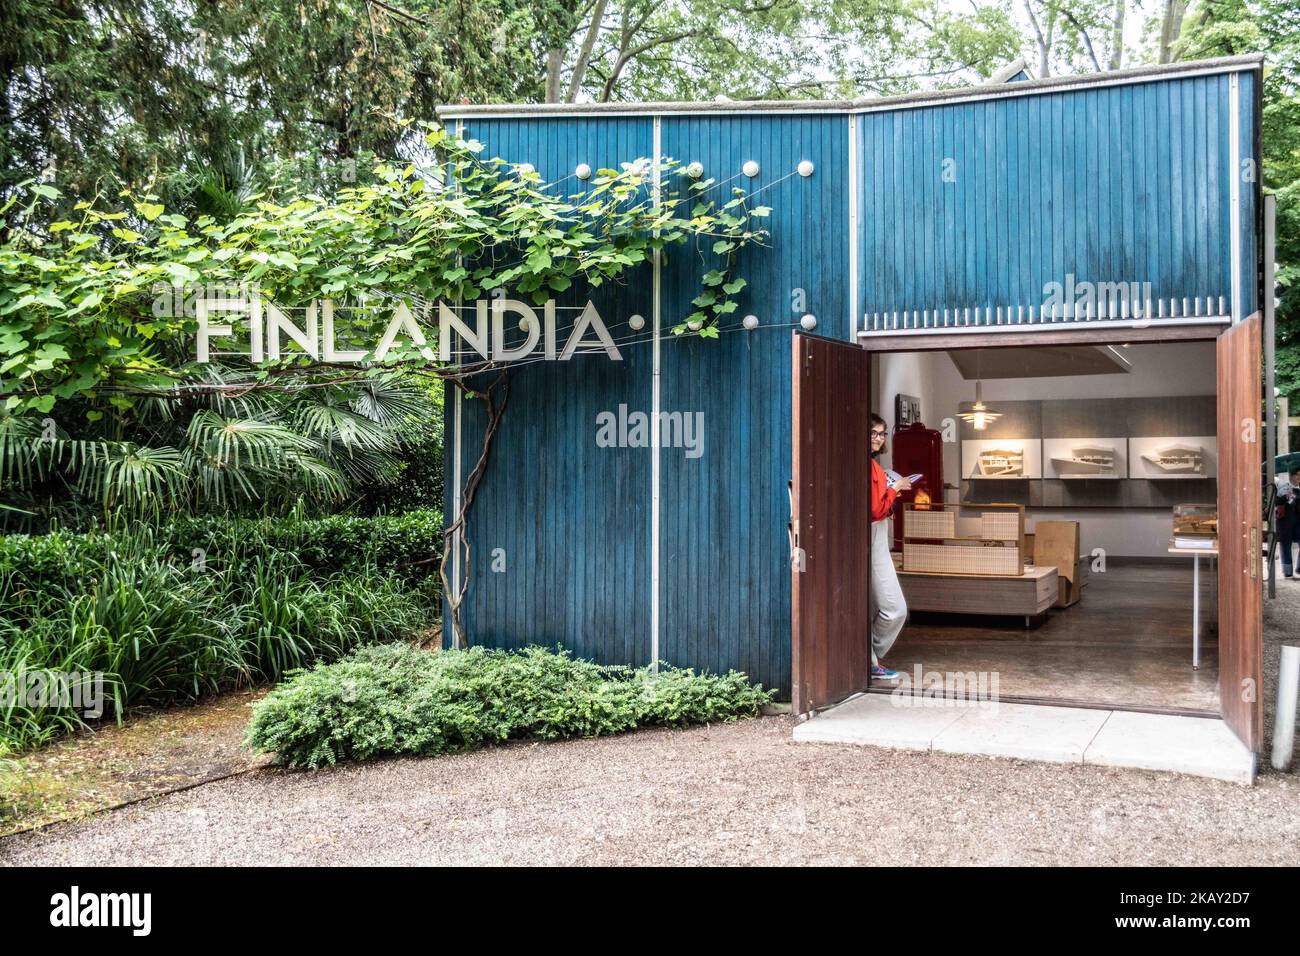 Finland's representation at the 16th International Architecture Exhibition of La Biennale di Venezia in Venice, Italy, on May 23, 2018 responds to the theme 'Freespace' by transforming the Alvar Aalto Pavilion of Finland into a temporary library space. (Photo by Giacomo Cosua/NurPhoto) Stock Photo